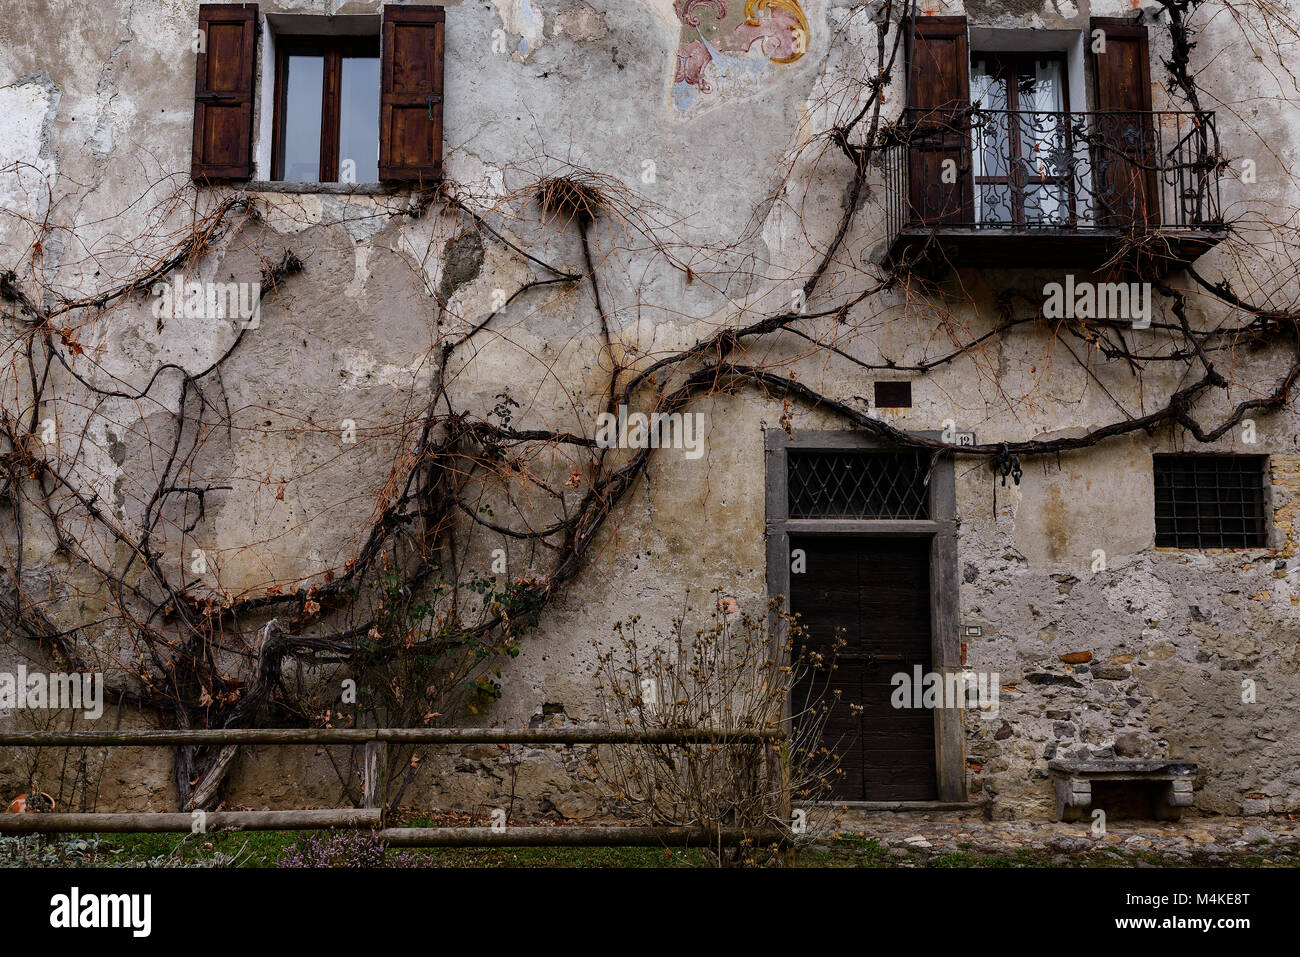 Old house with roots on the walls (architecture image) Stock Photo